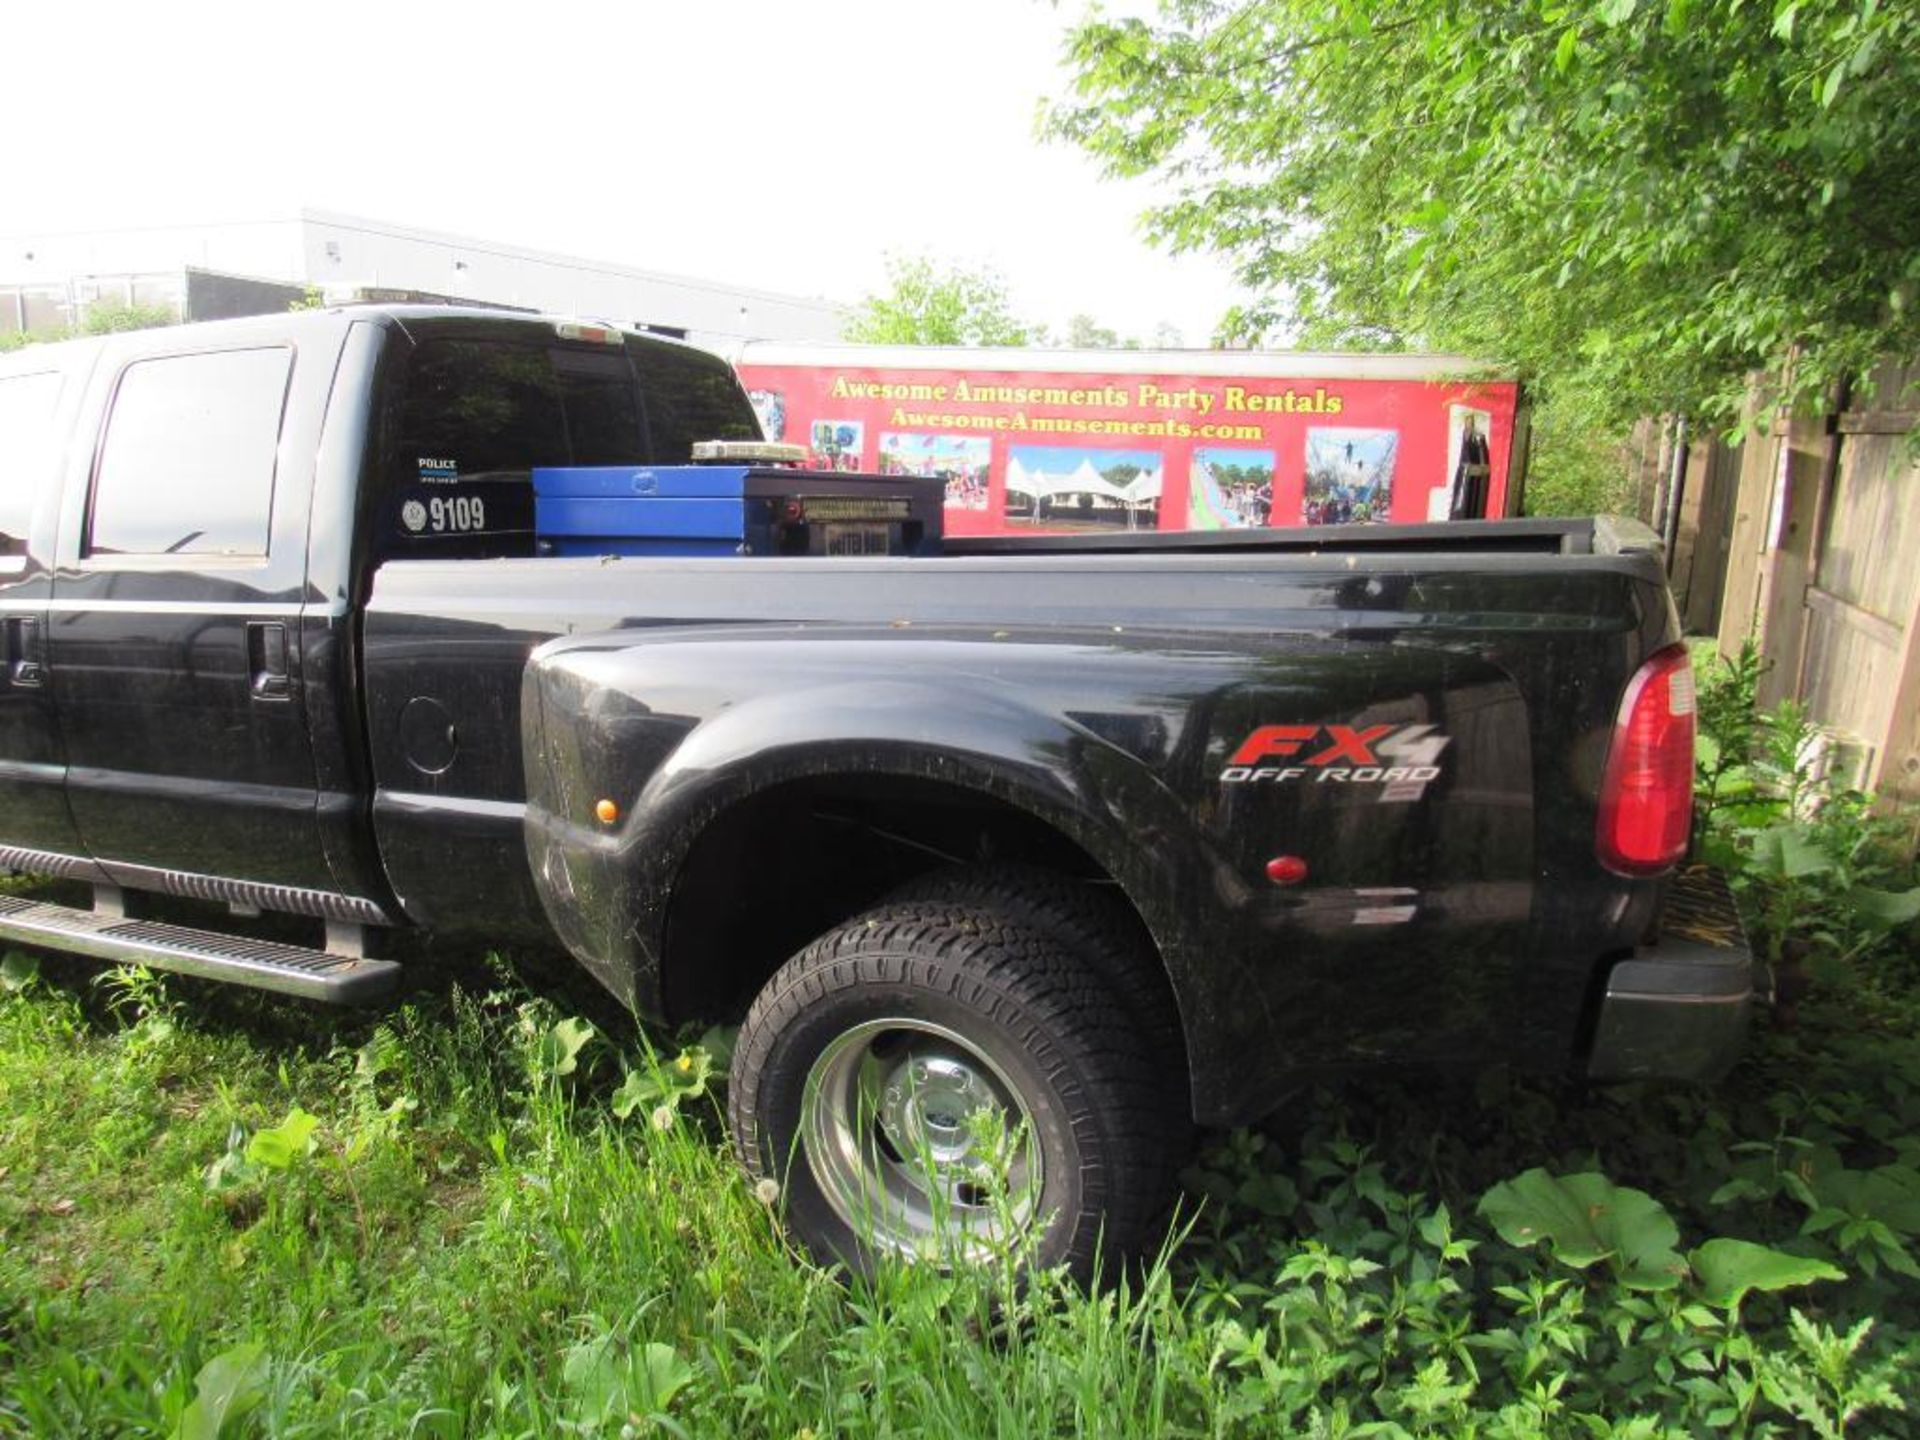 FORD 2009 F350 Crew Cab Dually, VIN 1FTWW33Y99EA69118, 191,024 Indicated Miles (NEEDS ENGINE - EMERG - Image 7 of 16